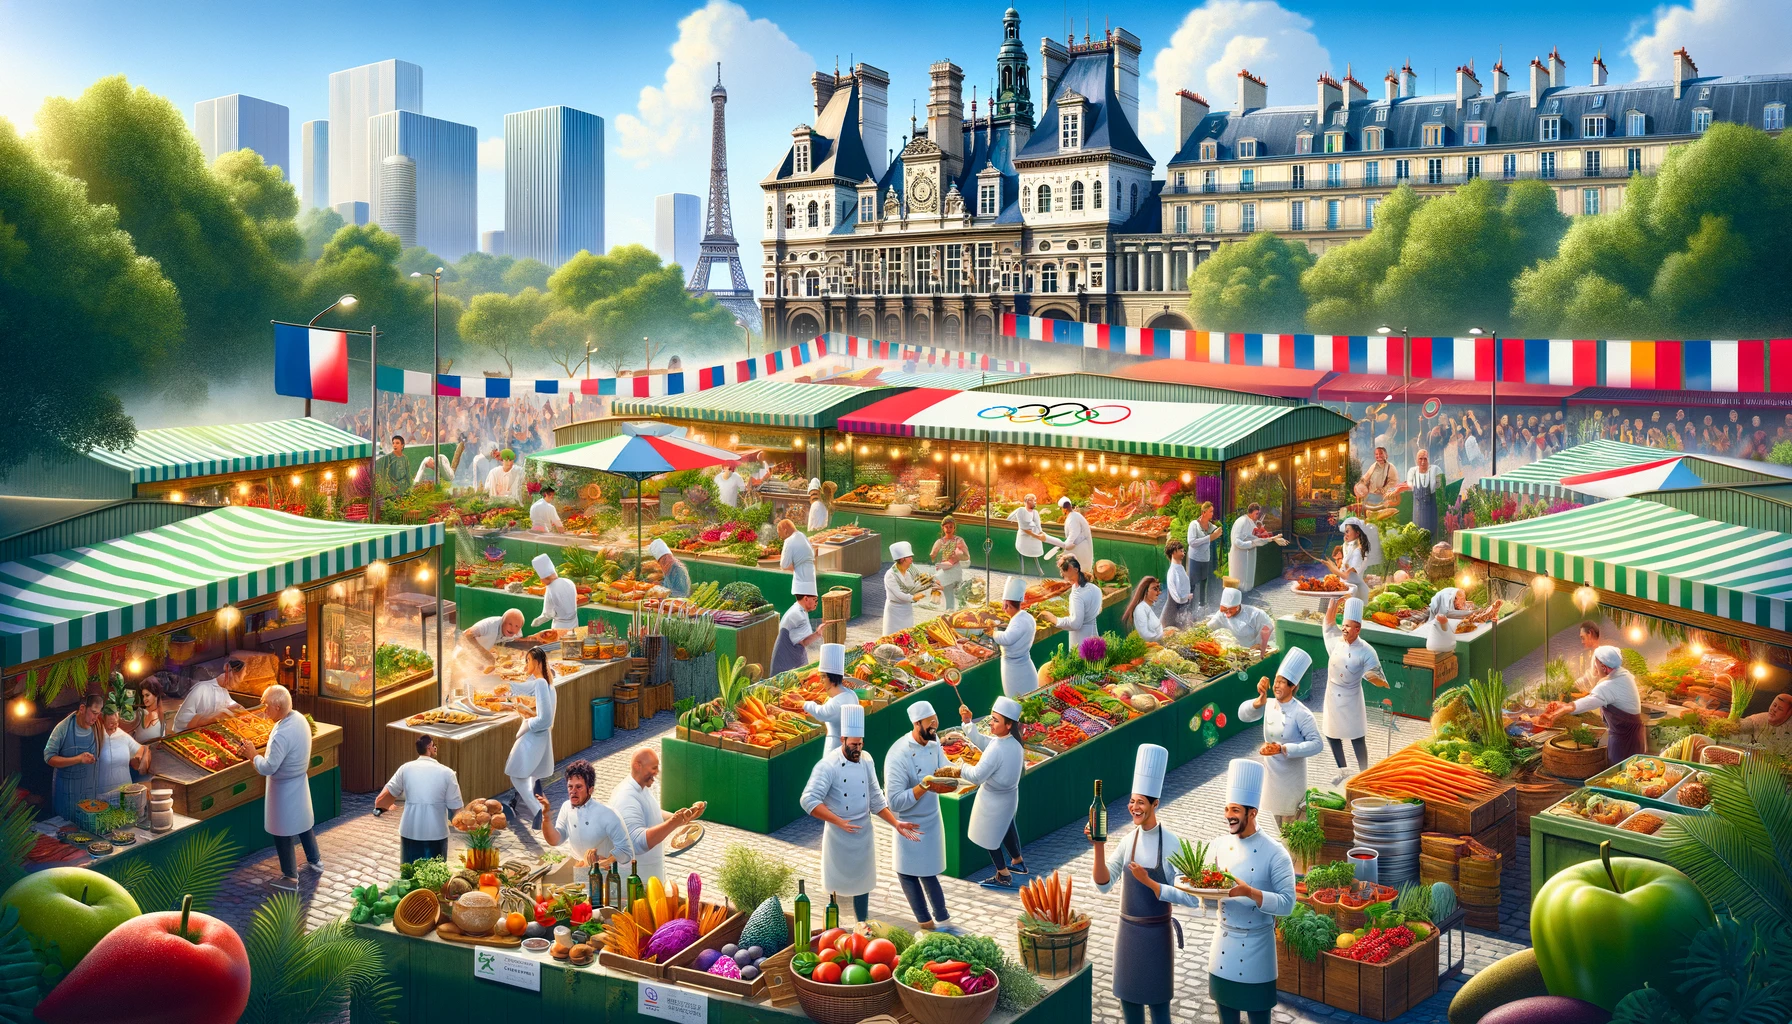 A AI image created by Dall-E representing the bustling vibrant parisian markets filled with chefs preparing for the paris olympics